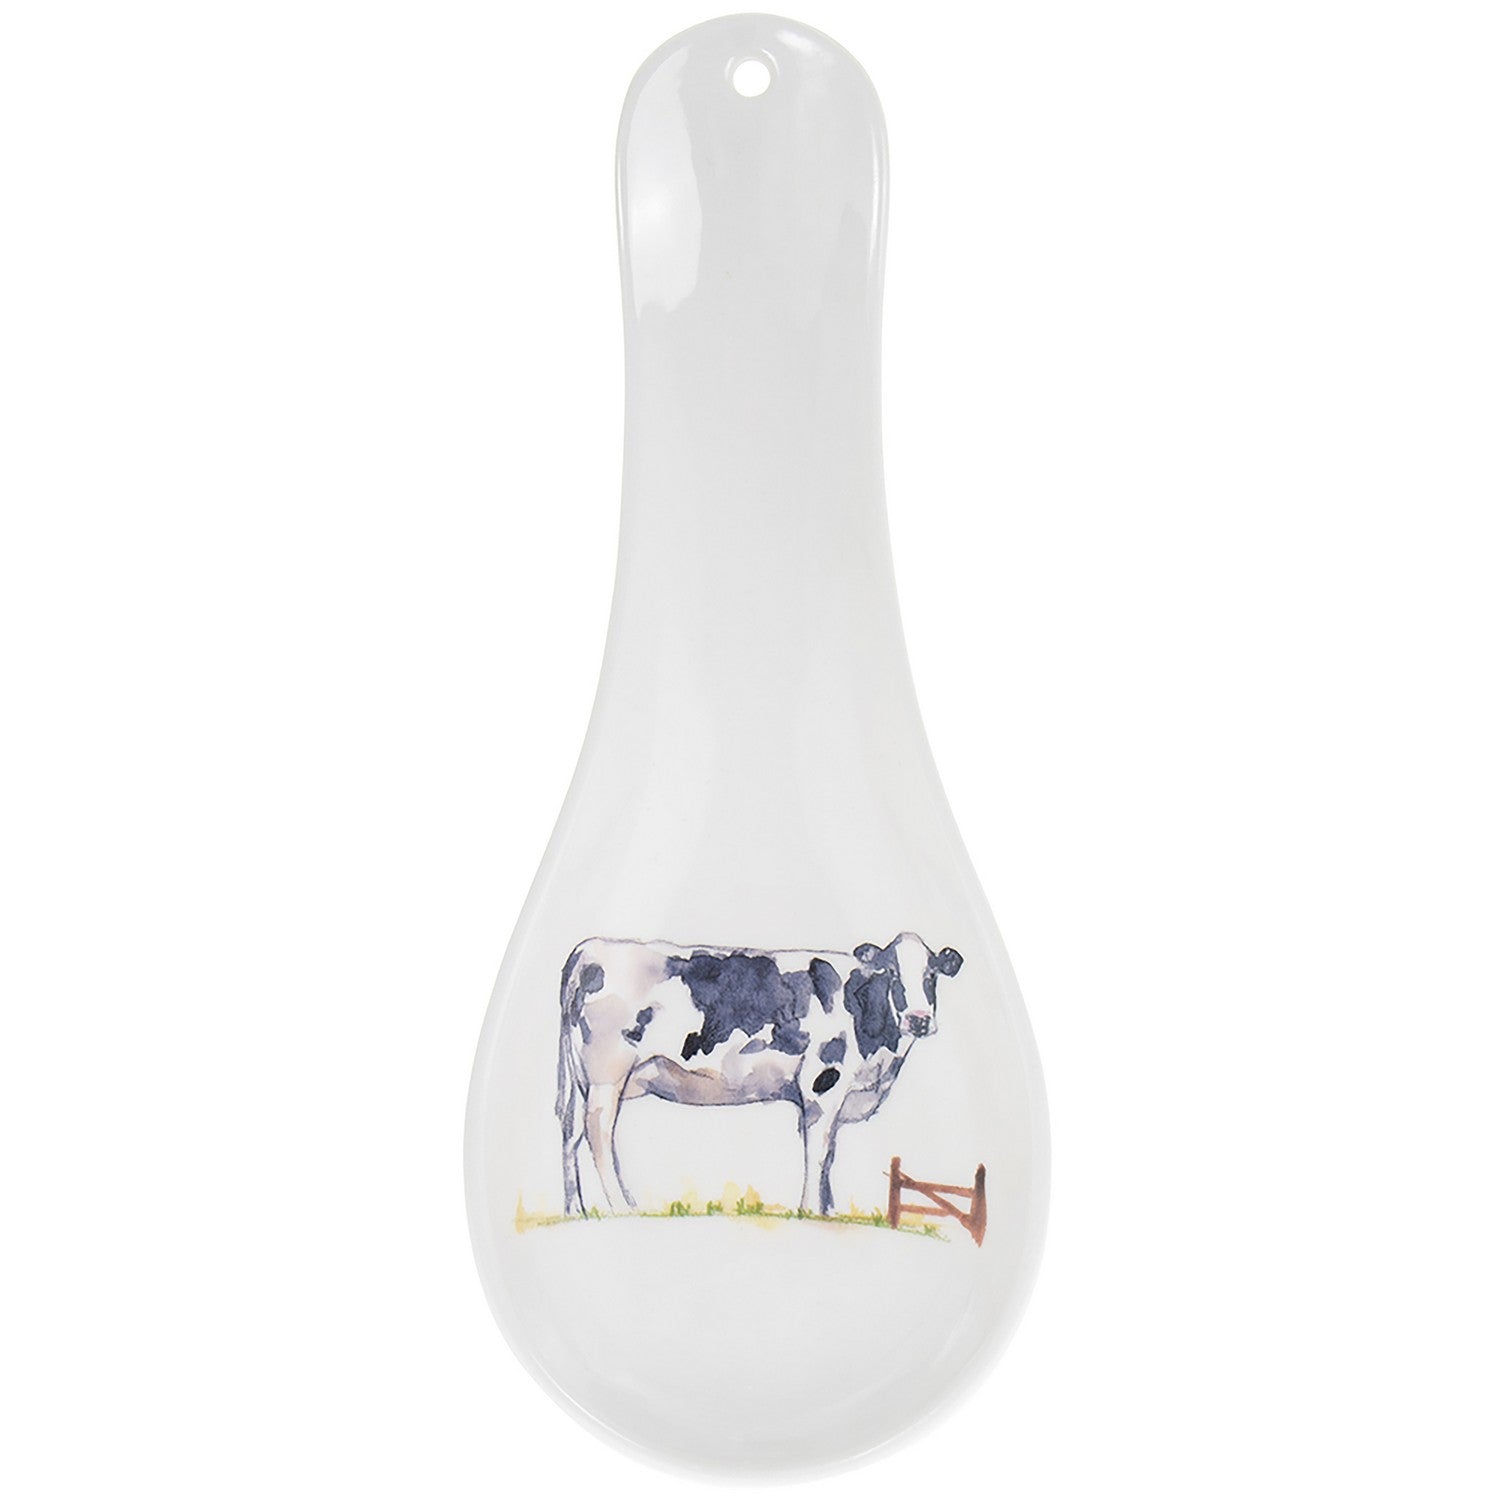 Country Life Farm Spoon Rest